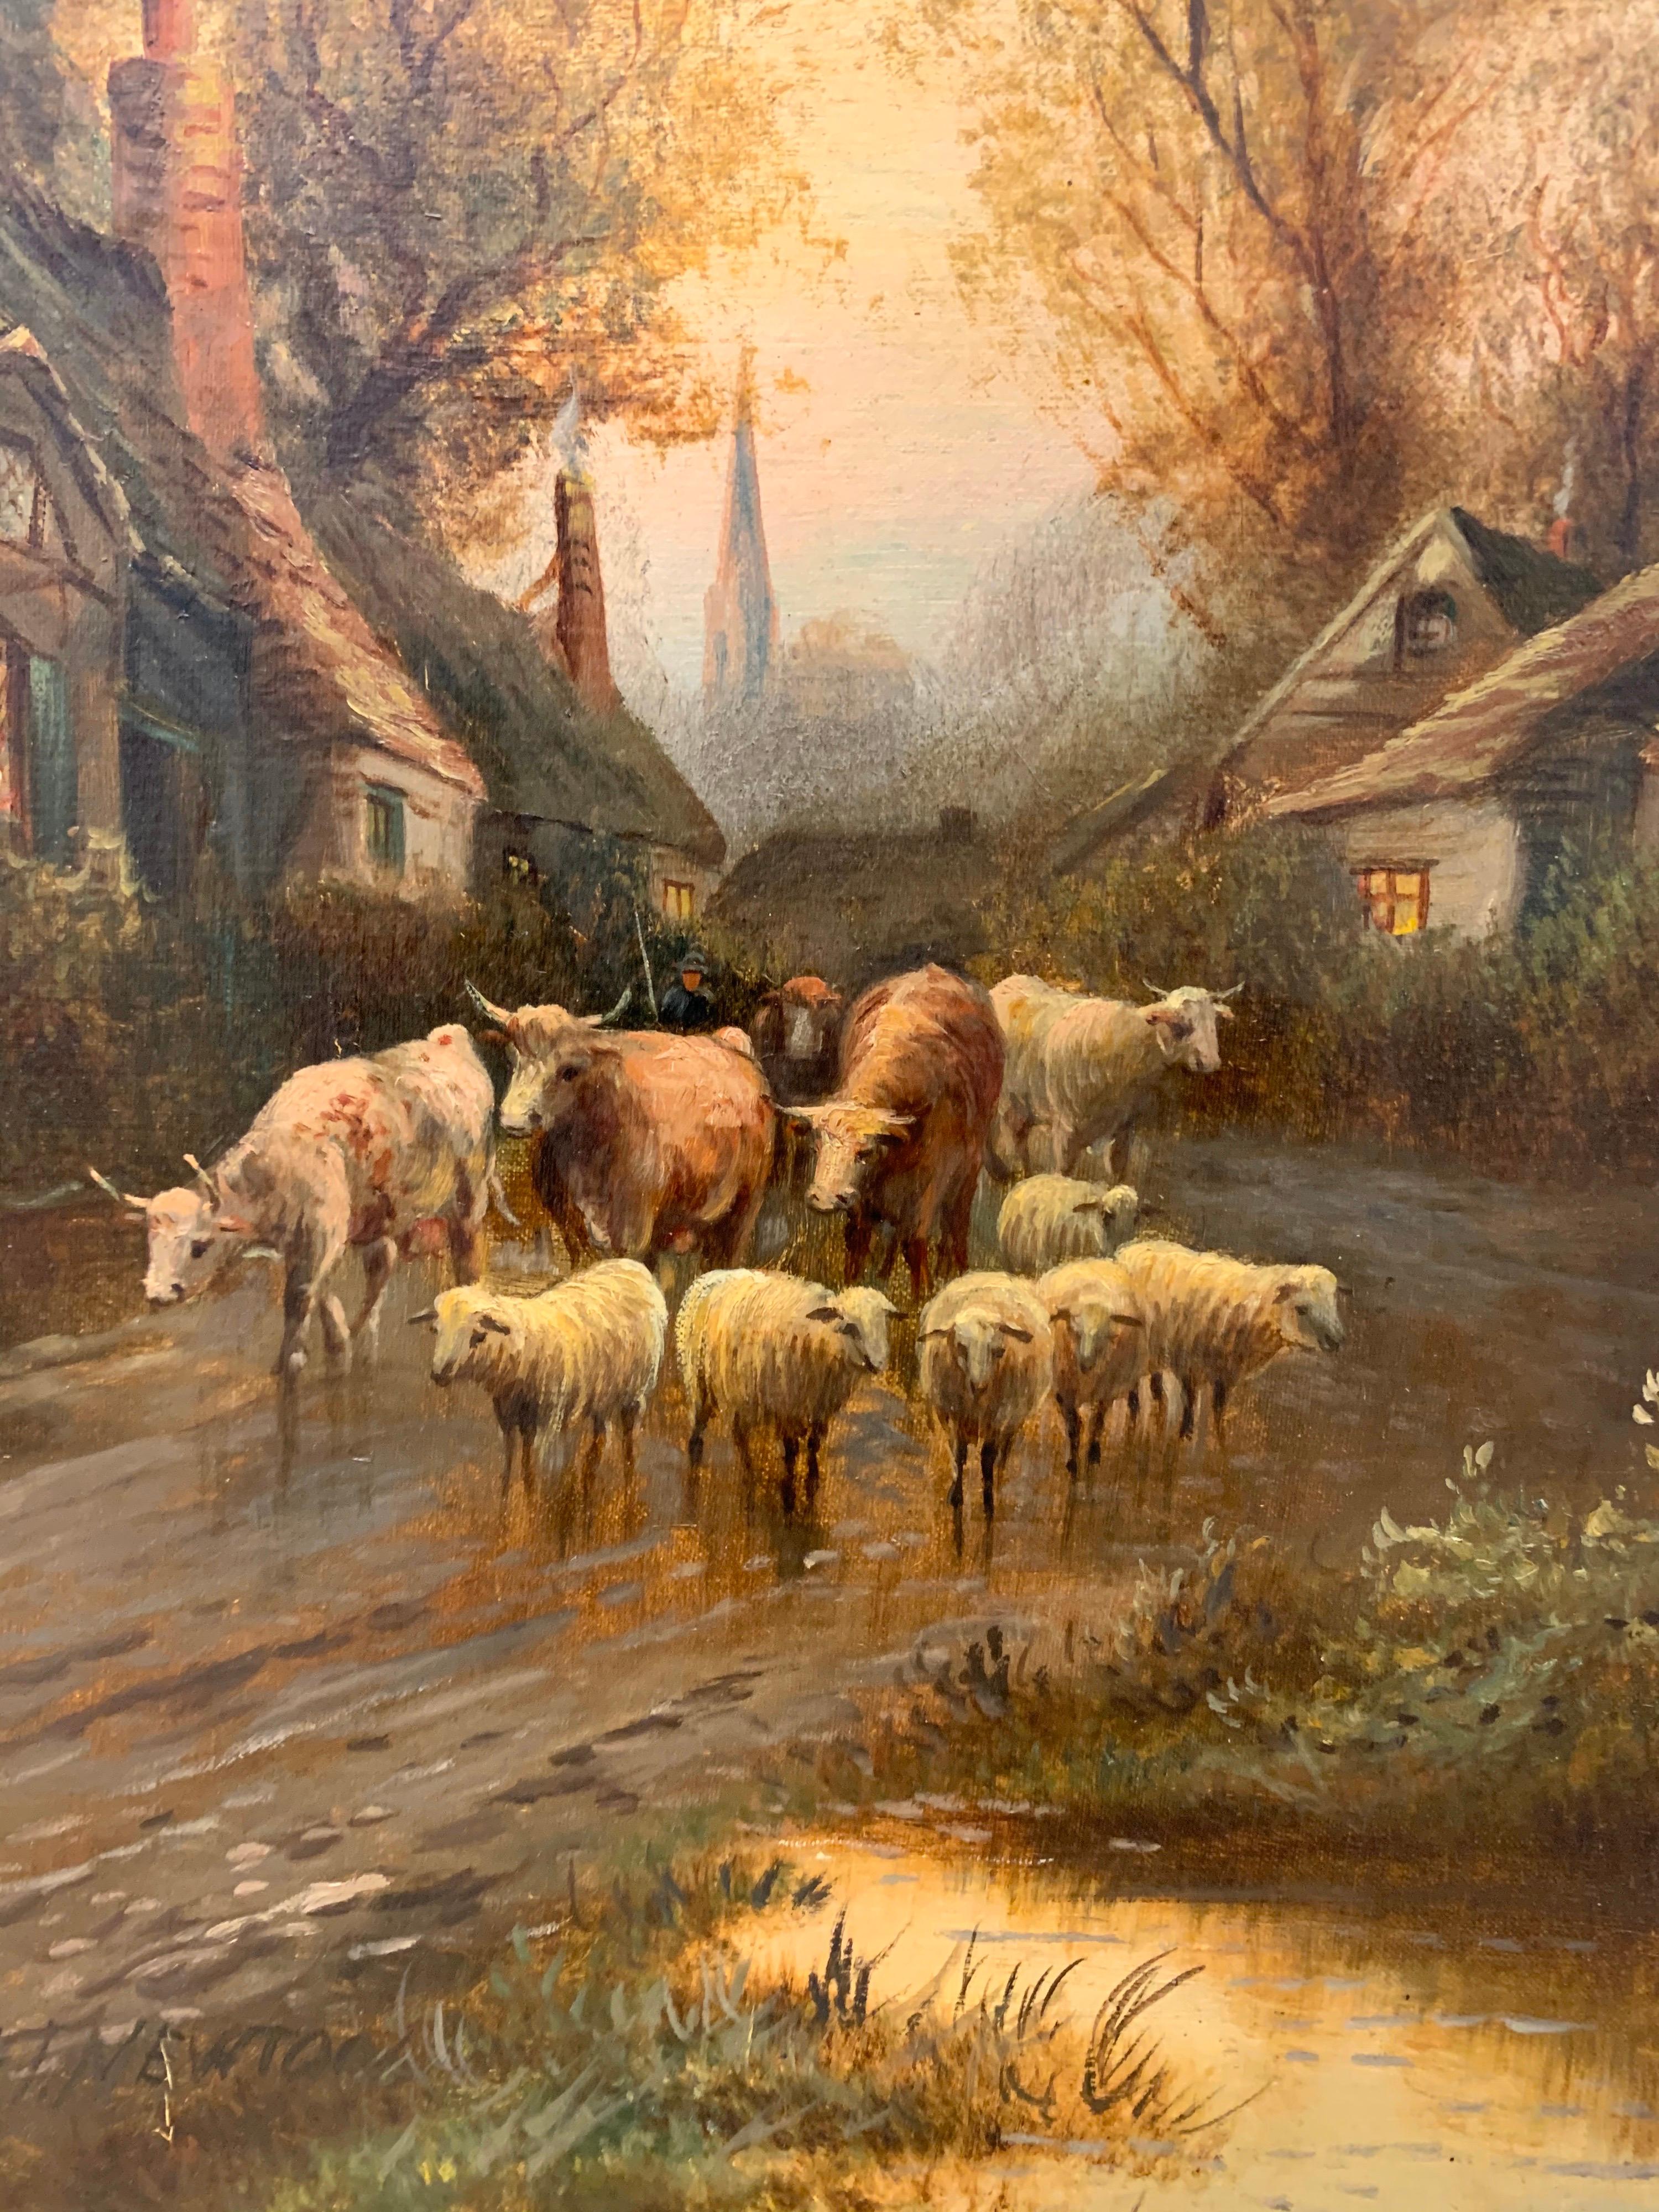 Elegant late 19th century antique original oil on canvas painting depicting a French countryside scene
with cows and sheep walking out of small village. Colors are vivid, frame is original and has some wear as it should. Artist signature present at